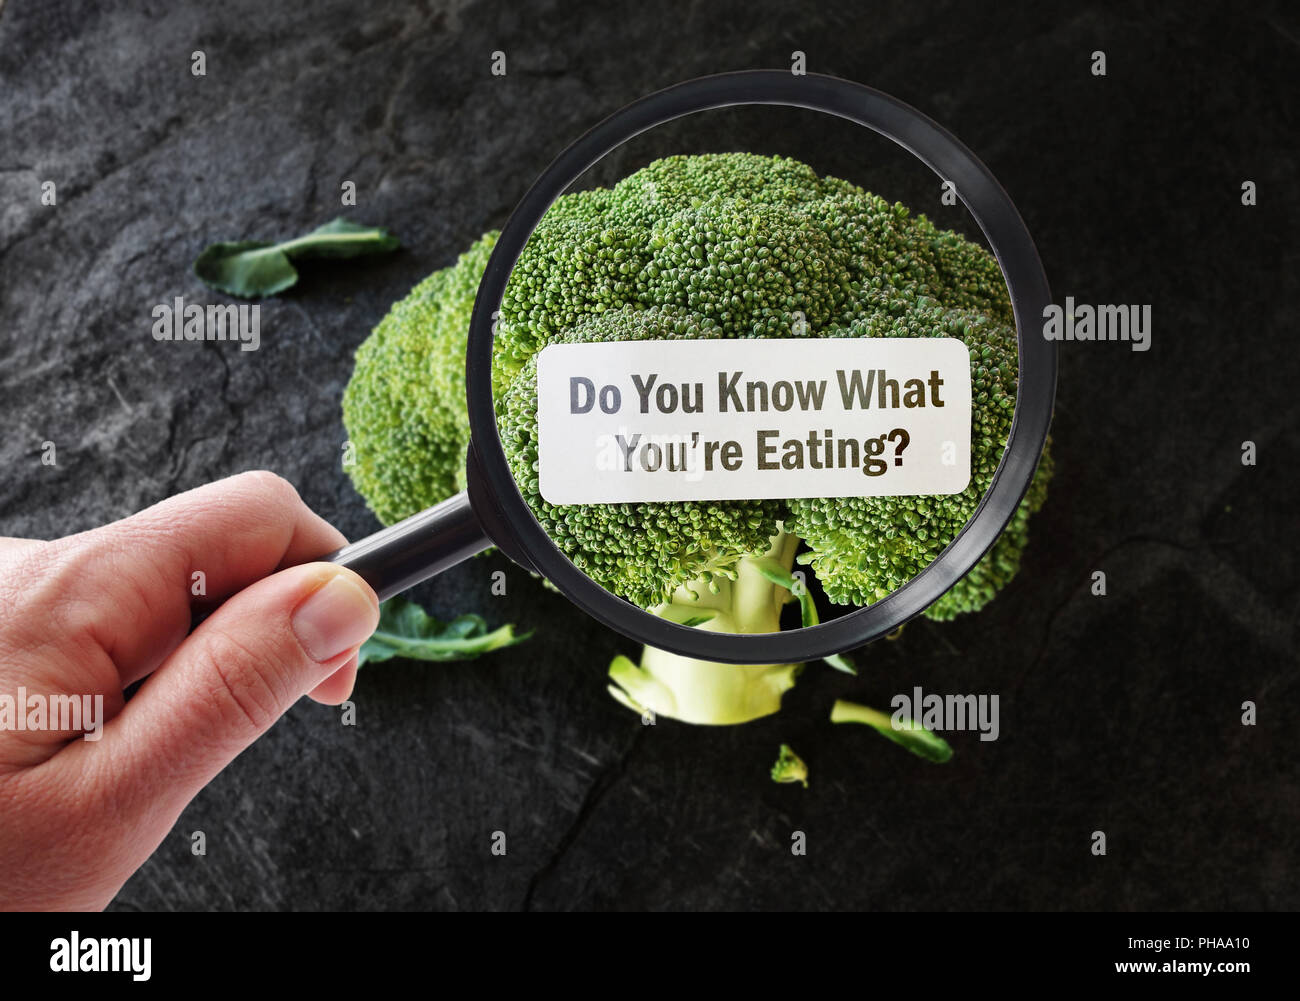 Magnified What Youre Eating food label Stock Photo